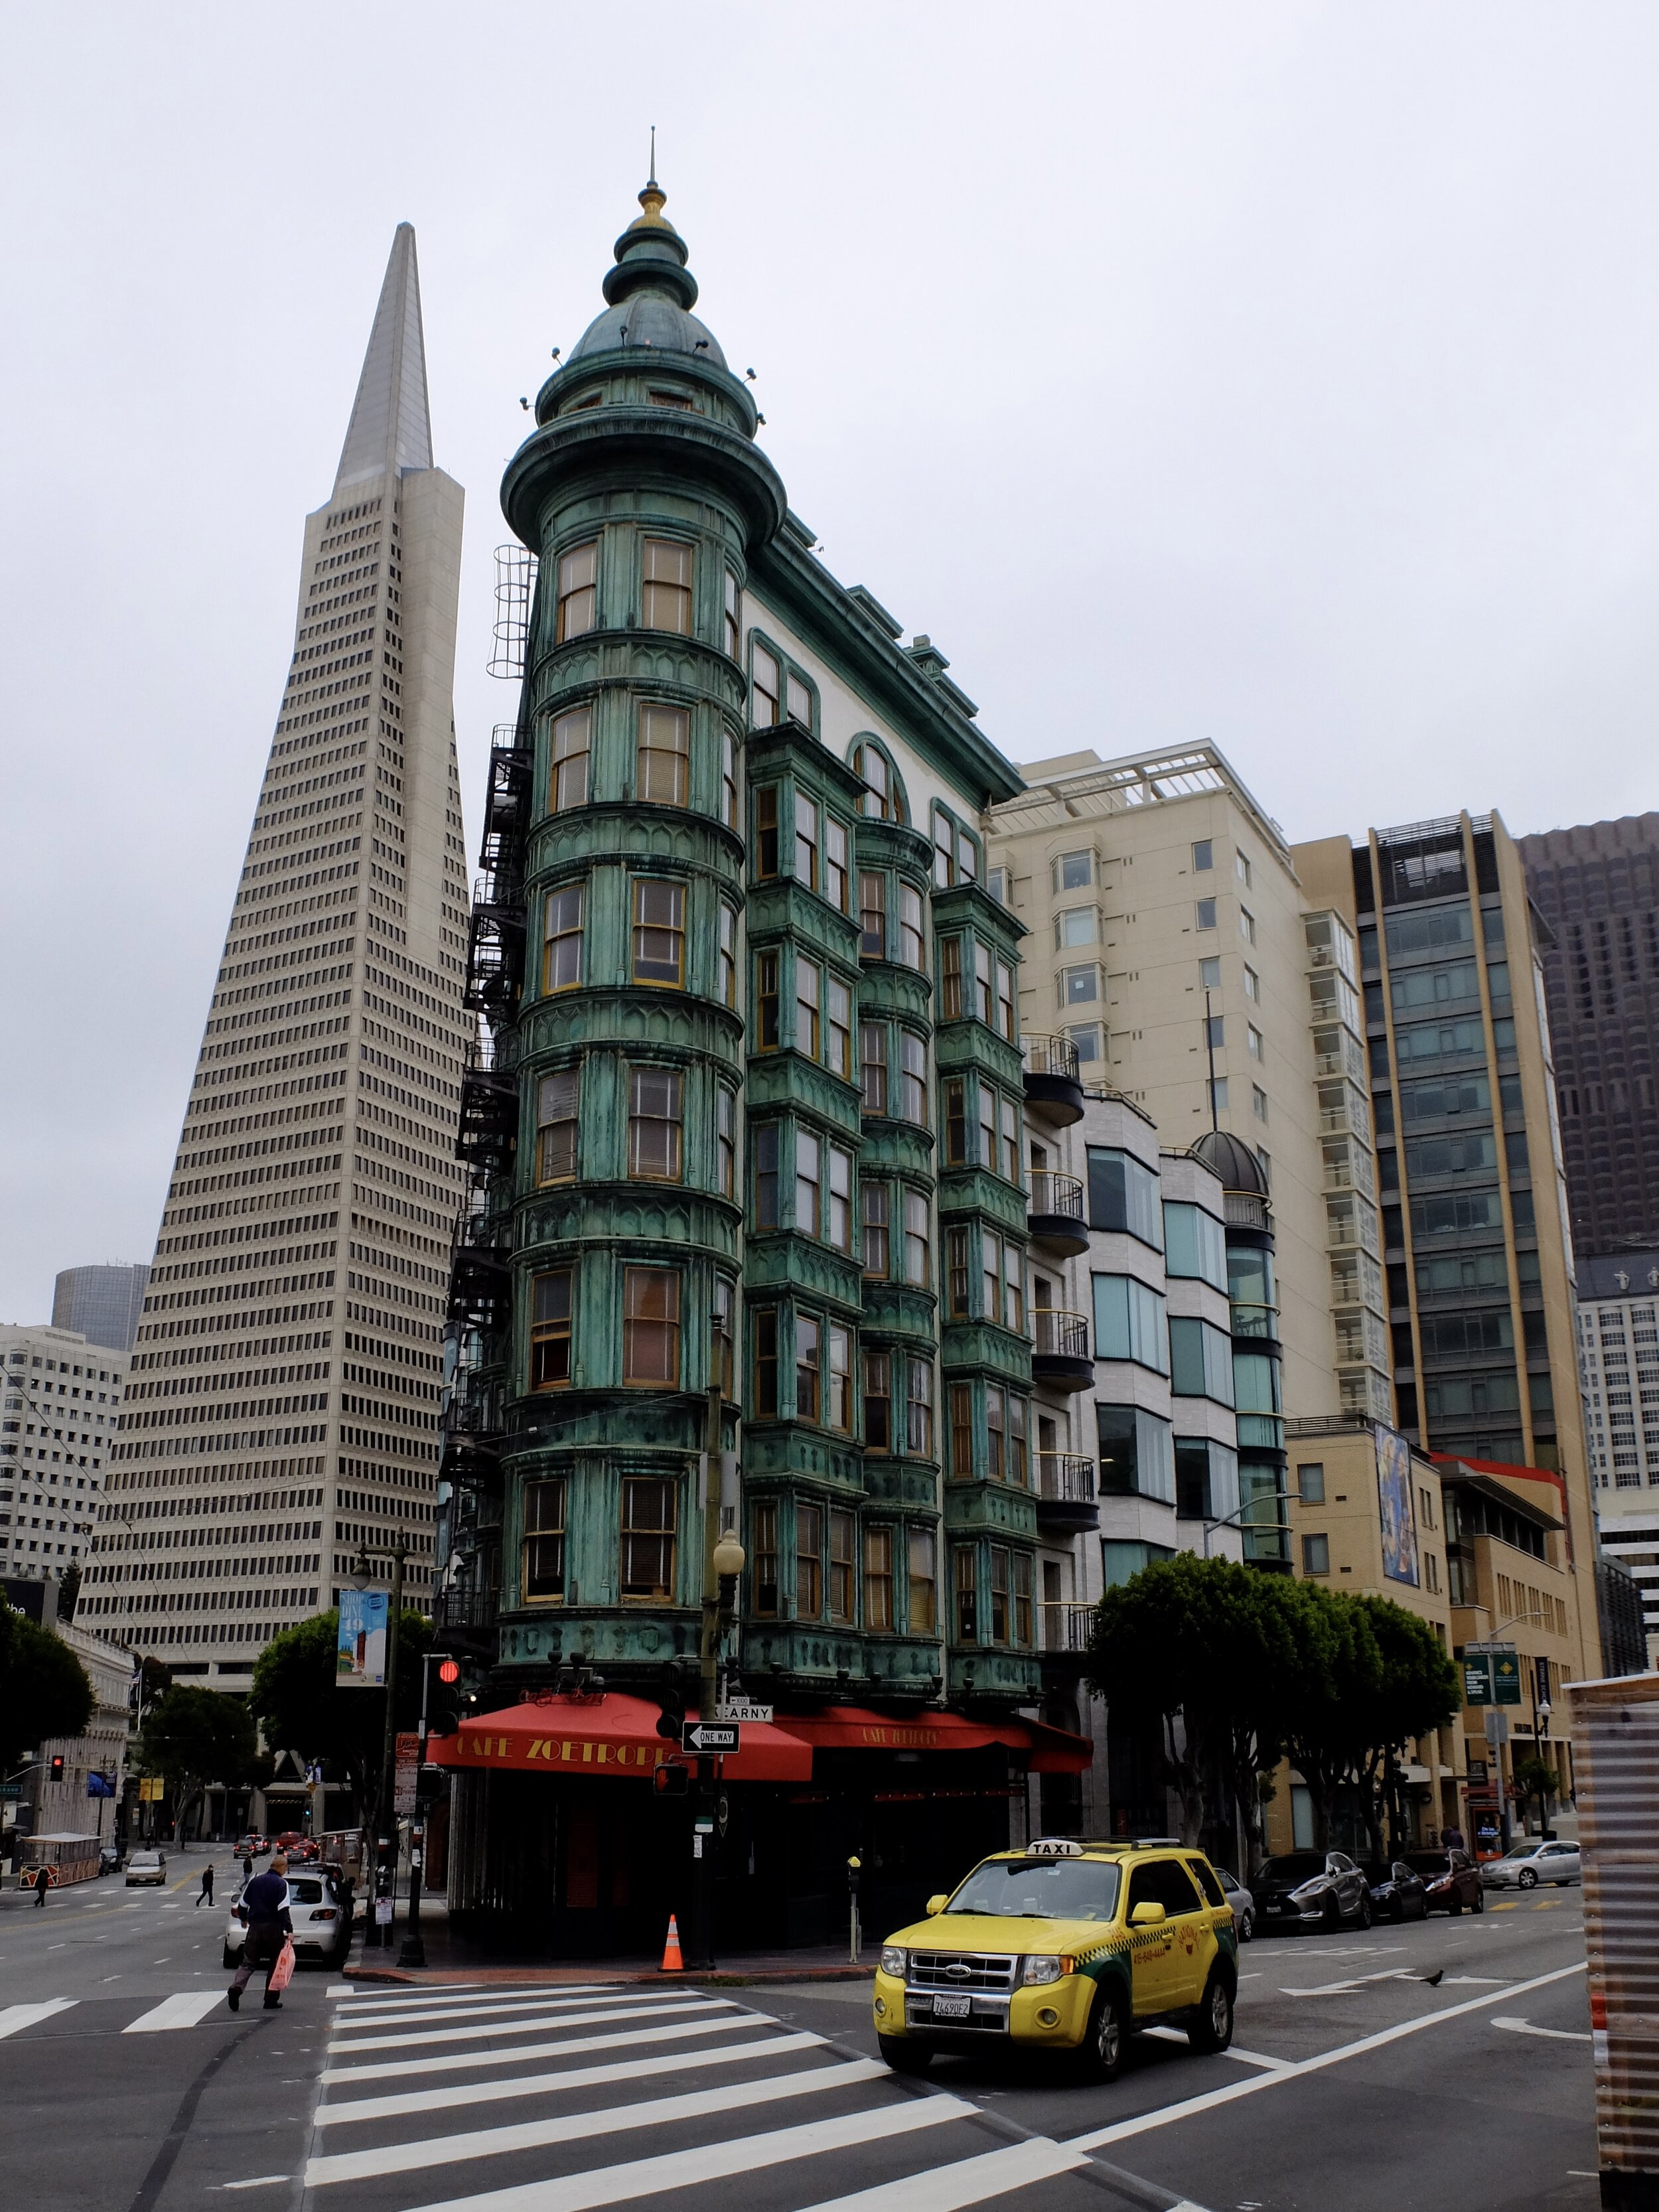 The 1907 Sentinel Building or Columbus Tower is listed as San Francisco Designated Landmark No. 33.  Much of the building is occupied by Francis Ford Coppola' film studio, American Zoetrope. 